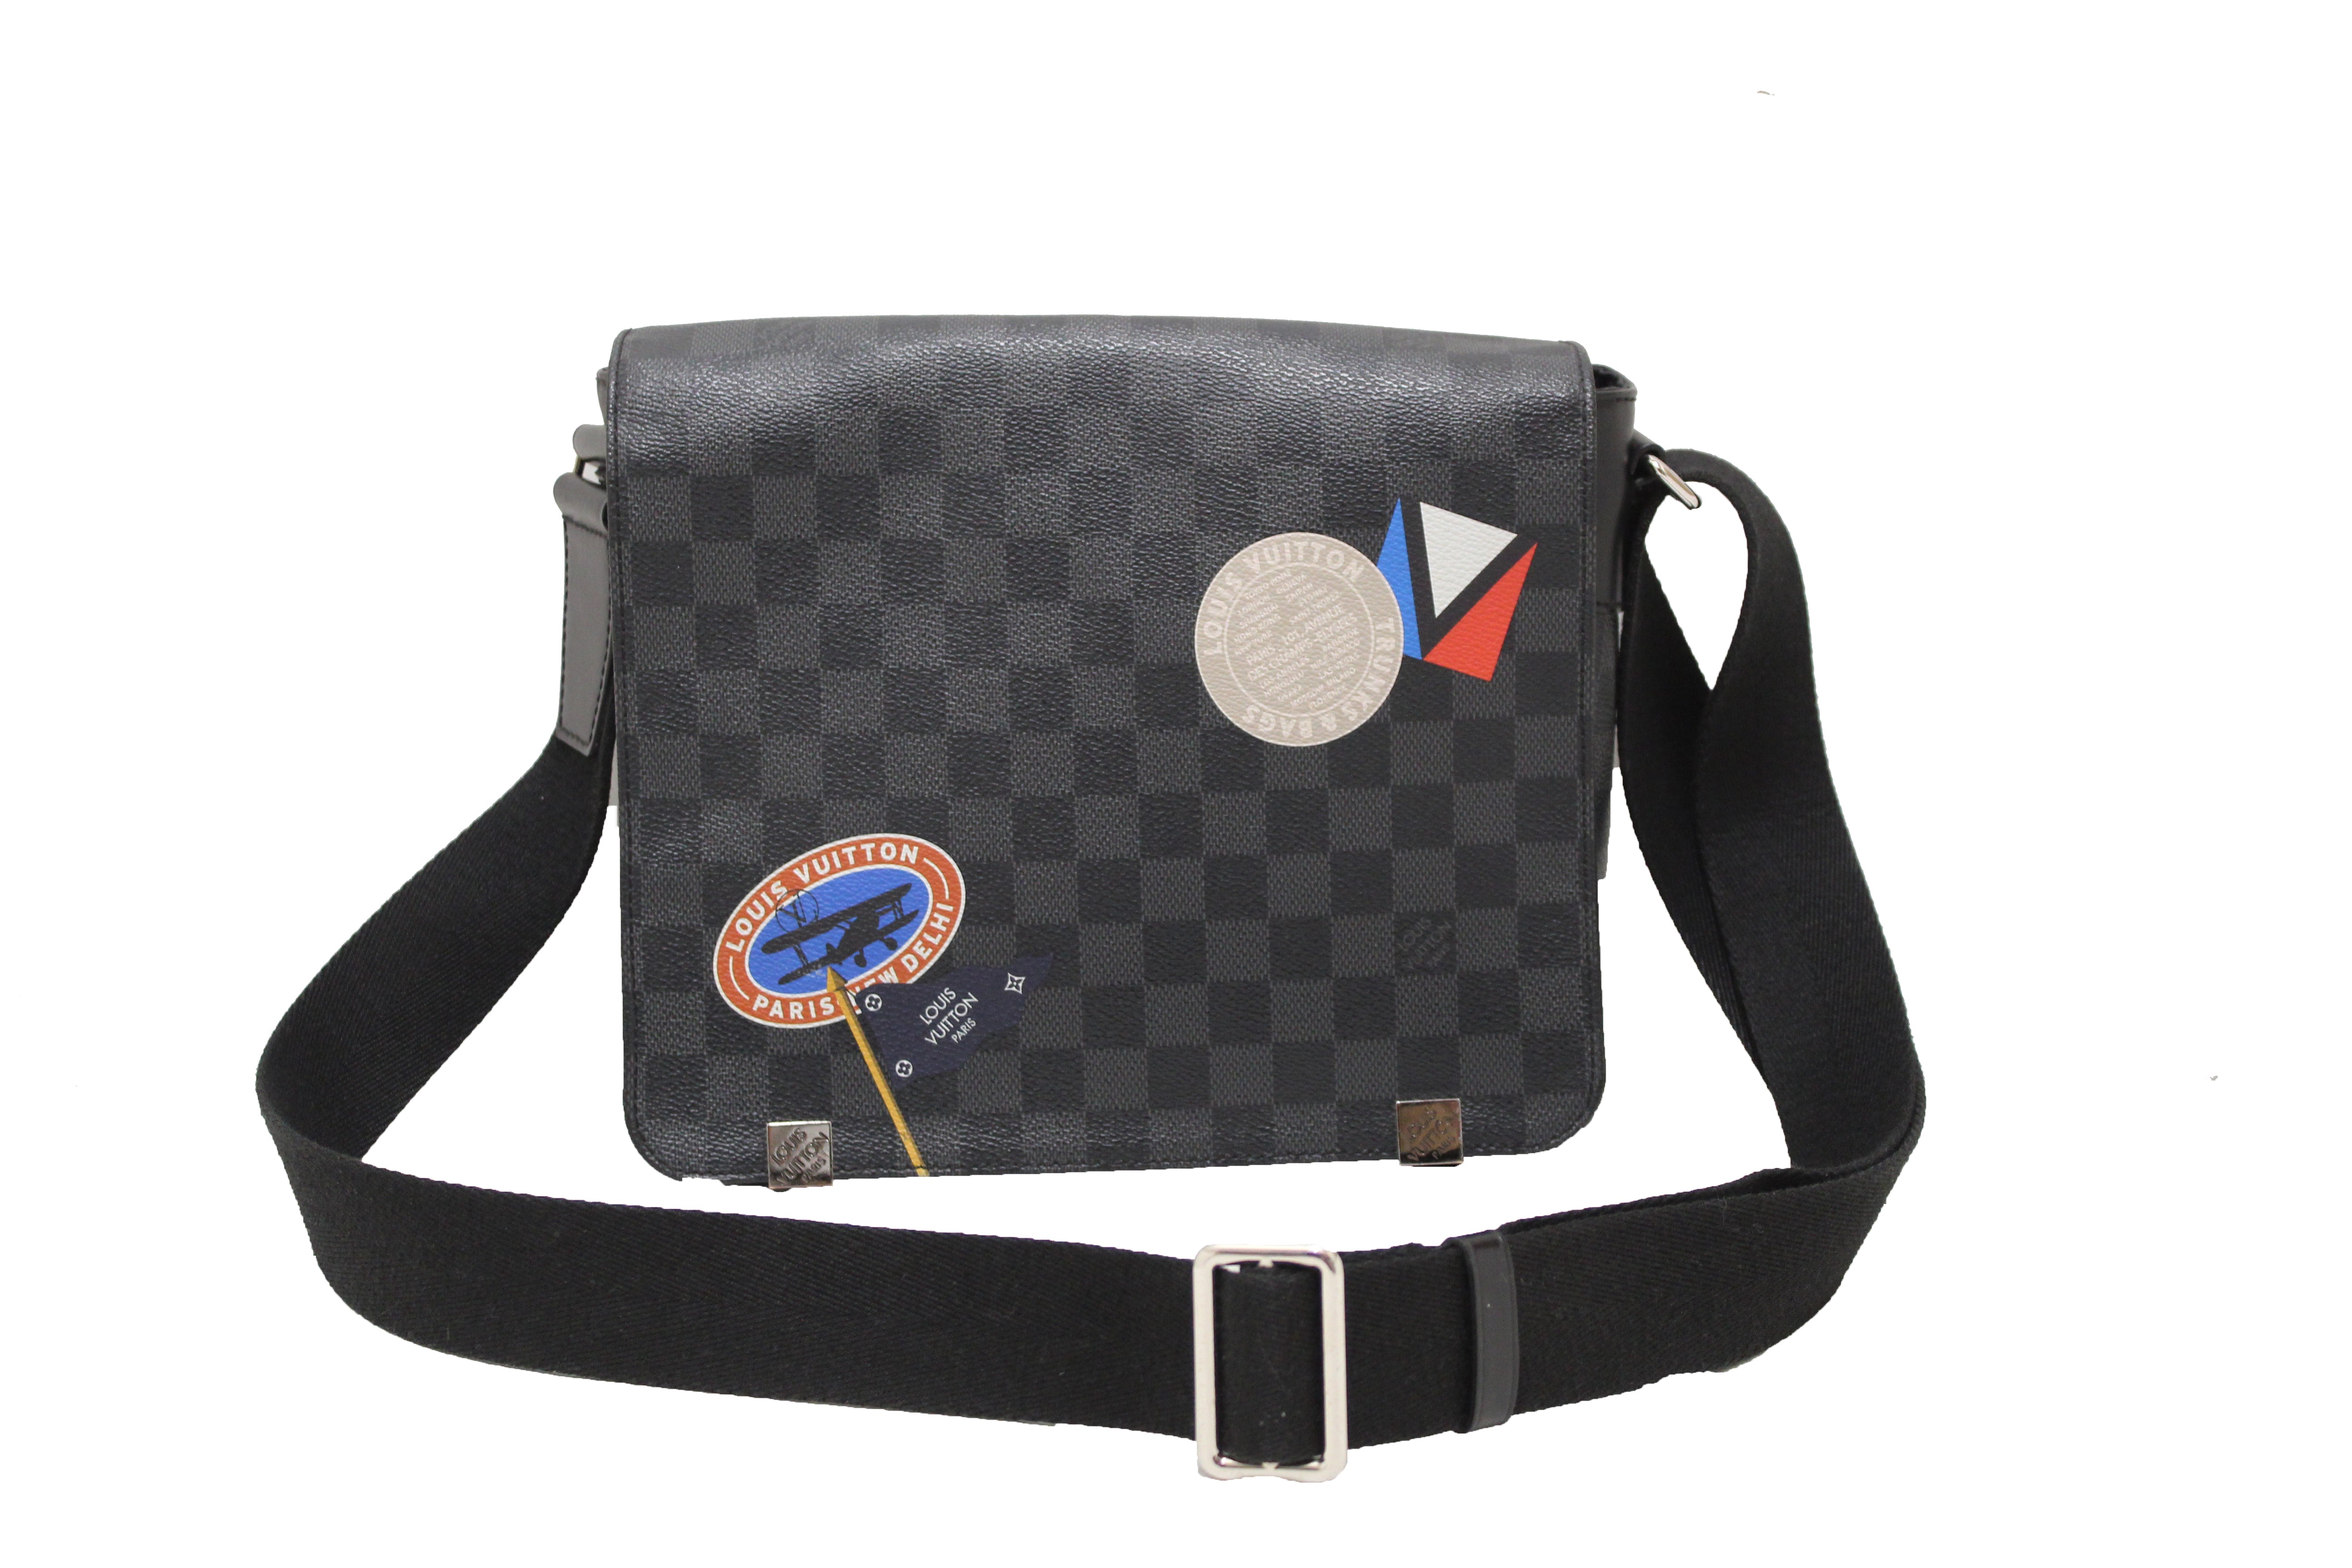 Free Website Traffic - Genuine Louis Vuitton LV Limited Edition